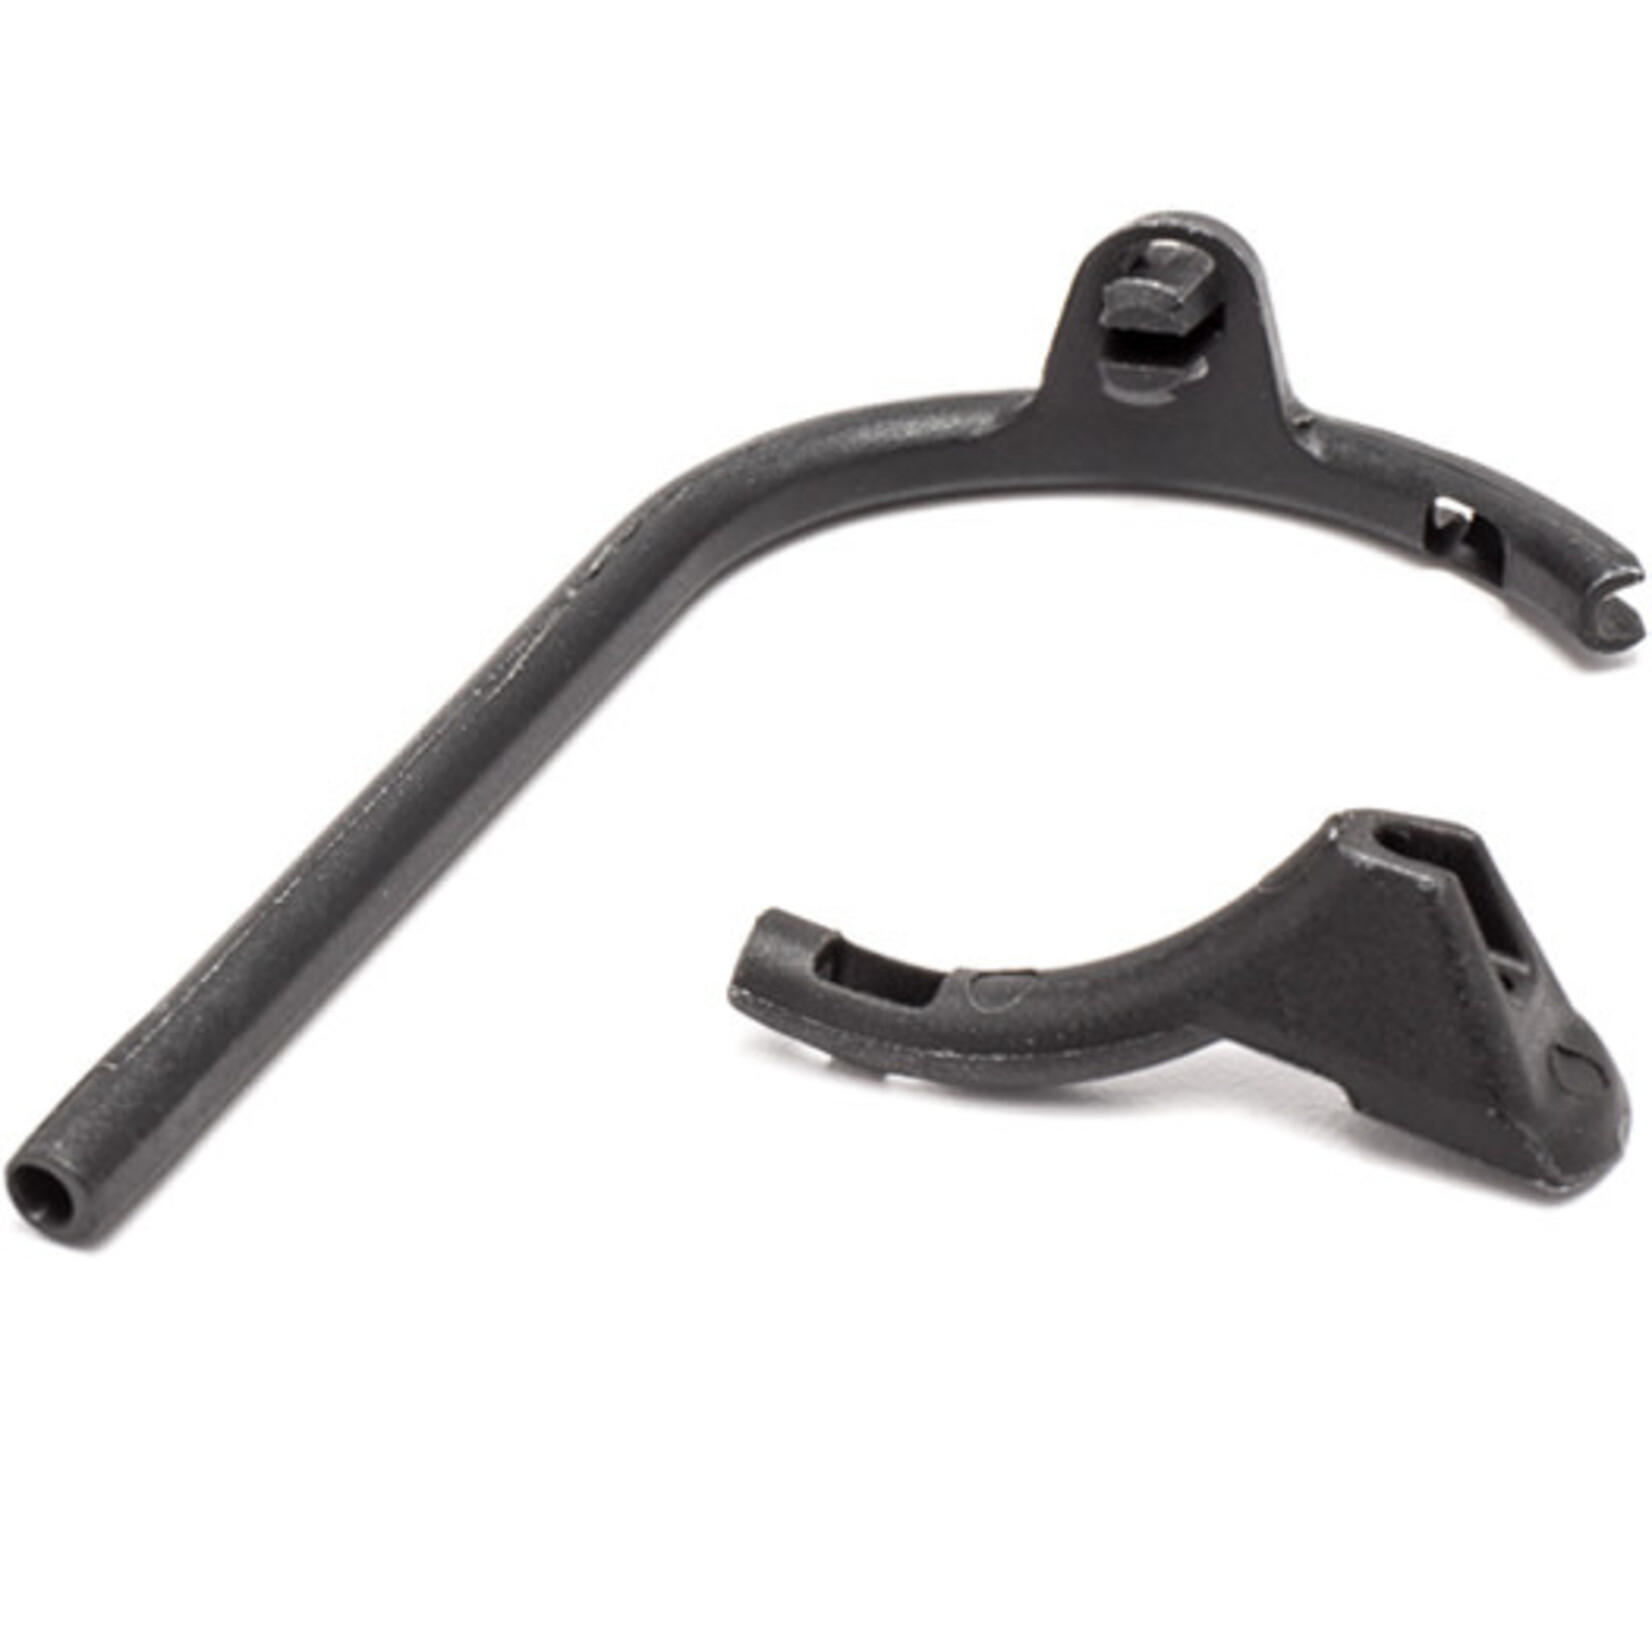 CANNONDALE Cannondale KP409/ Supersix Evo 2 Cable Guides